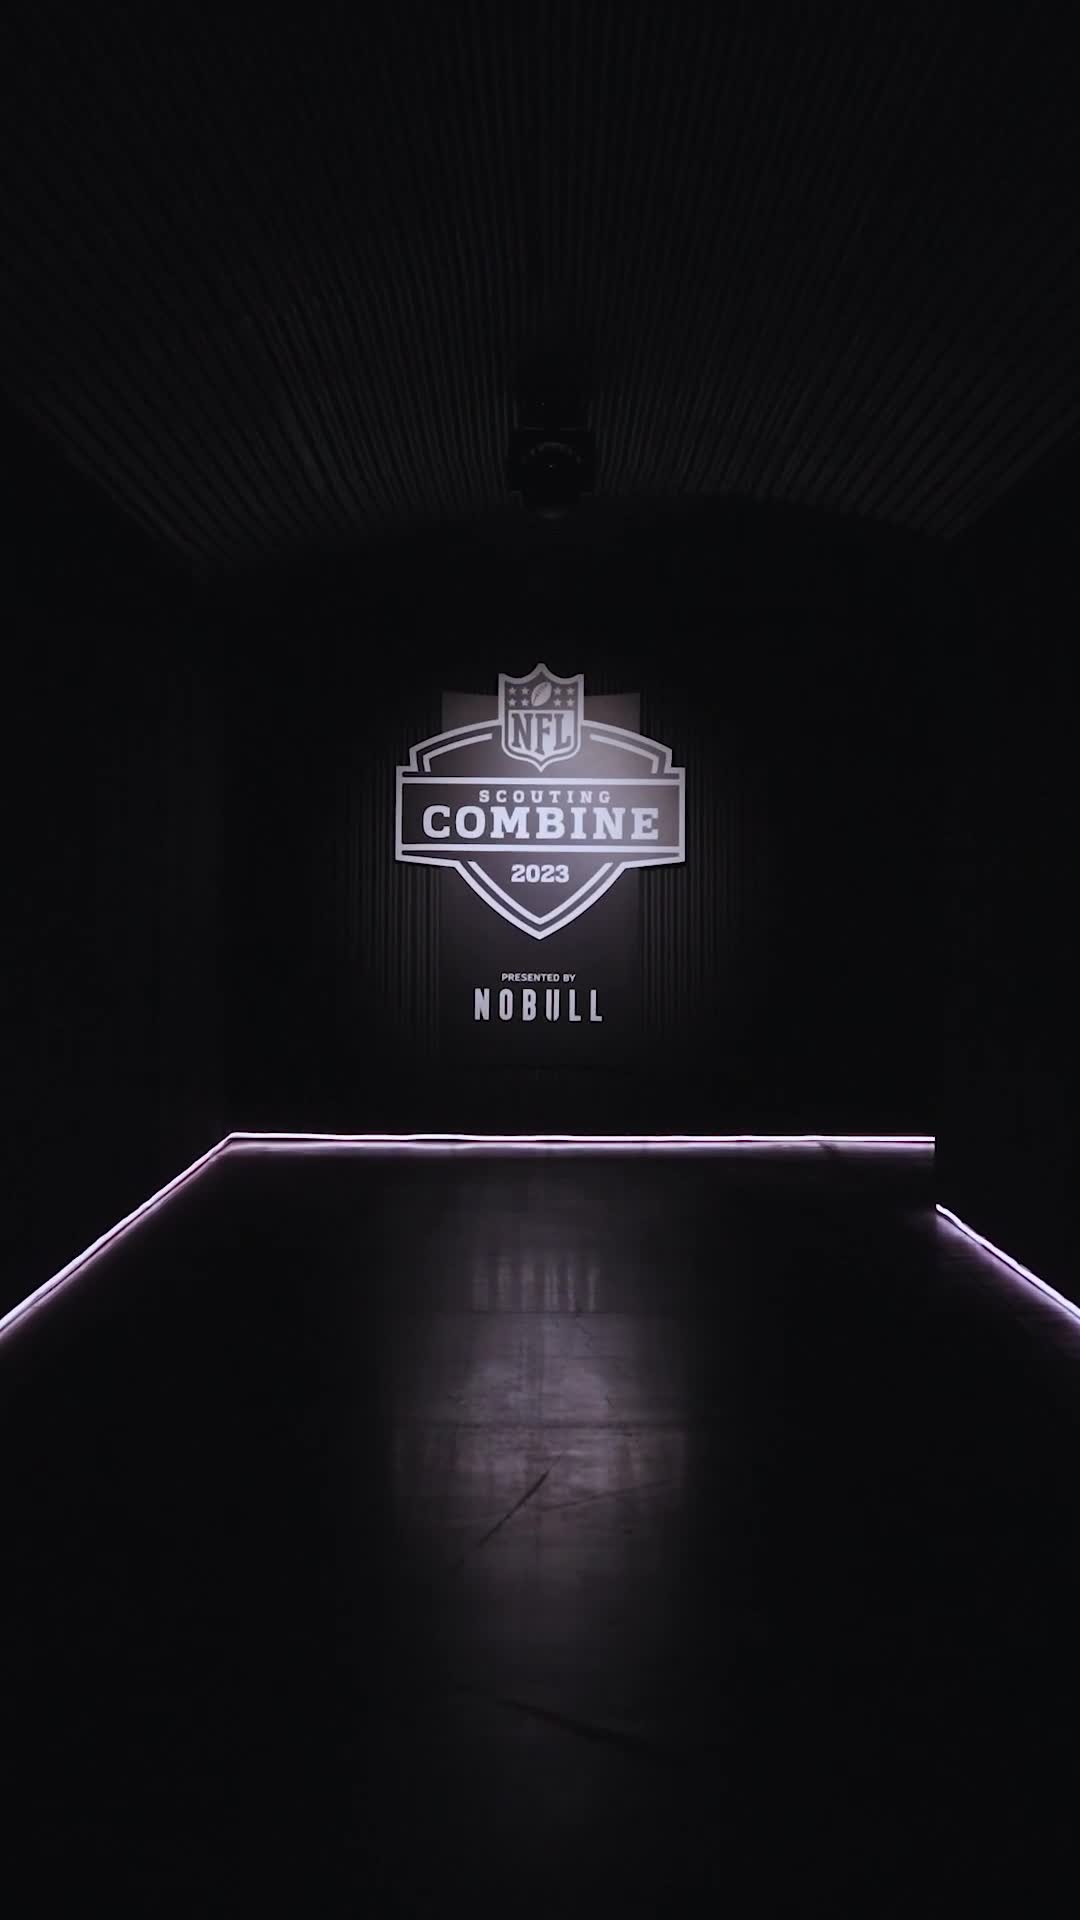 NOBULL and NFL Execs Talk About New Scouting Combine Partnership - Morning  Chalk Up